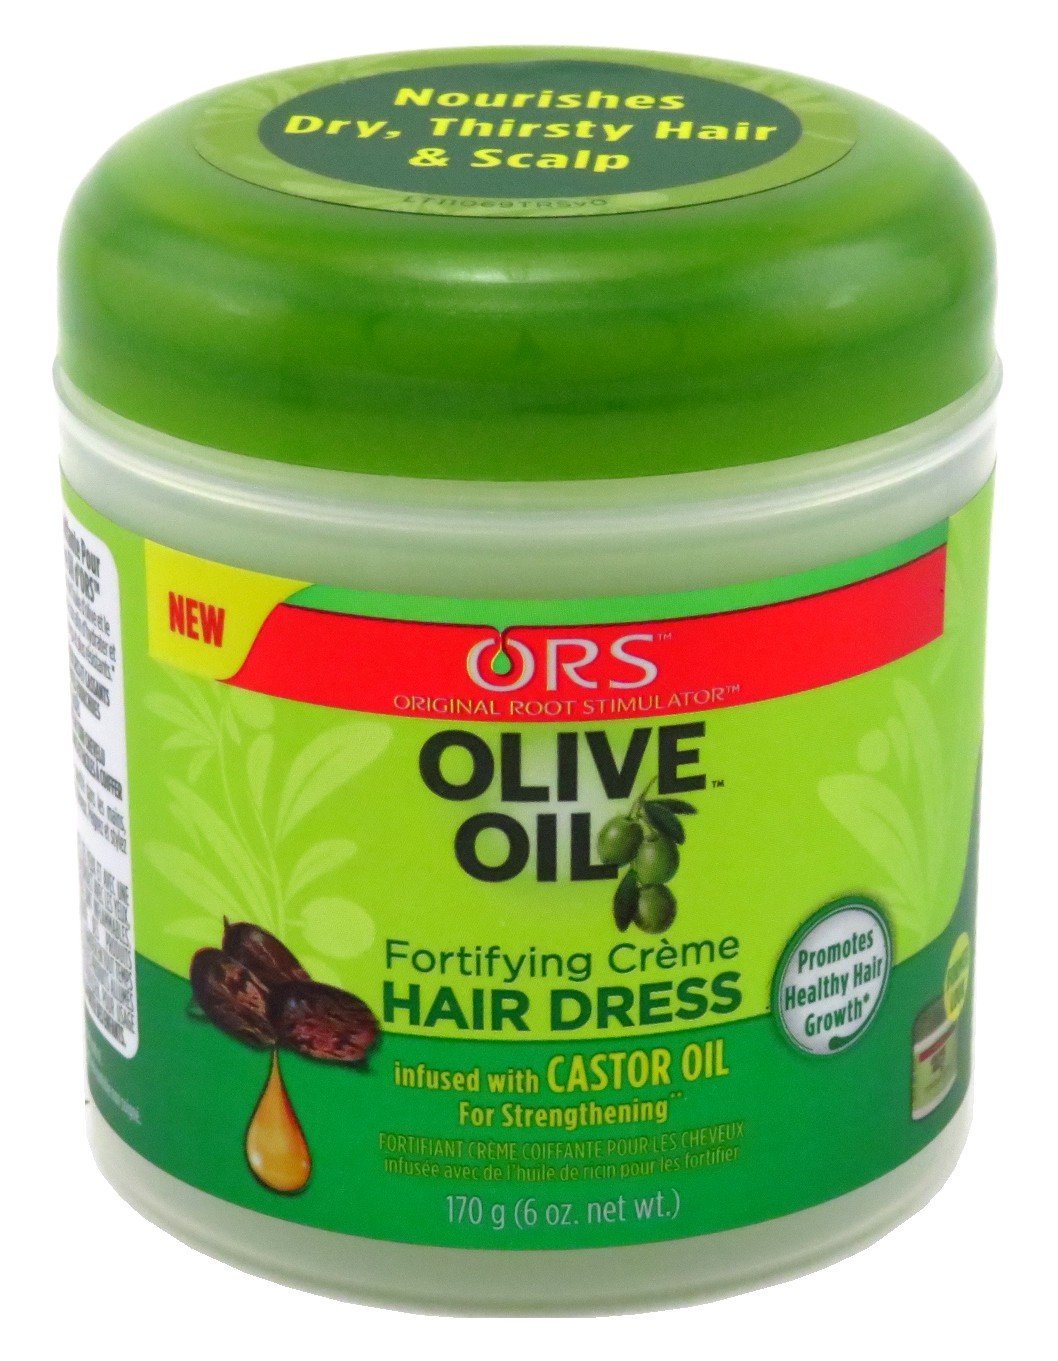 Ors Olive Oil Creme Hair Dress 6 Ounce Jar 177ml - image 1 of 2